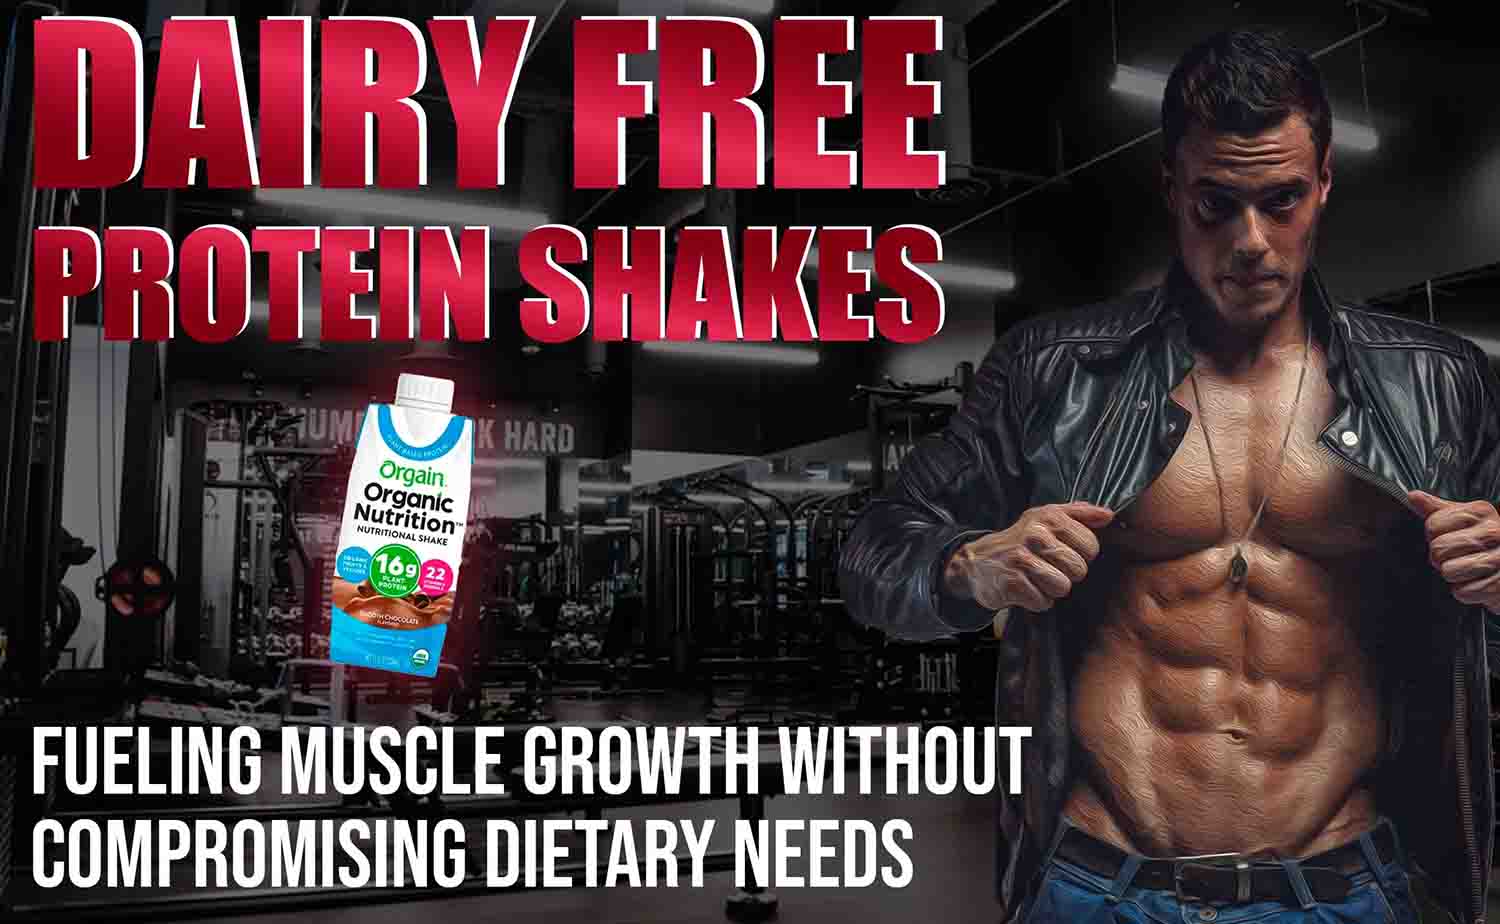 Dairy Free Protein Shakes: Fueling Muscle Growth Without Compromising Dietary Needs